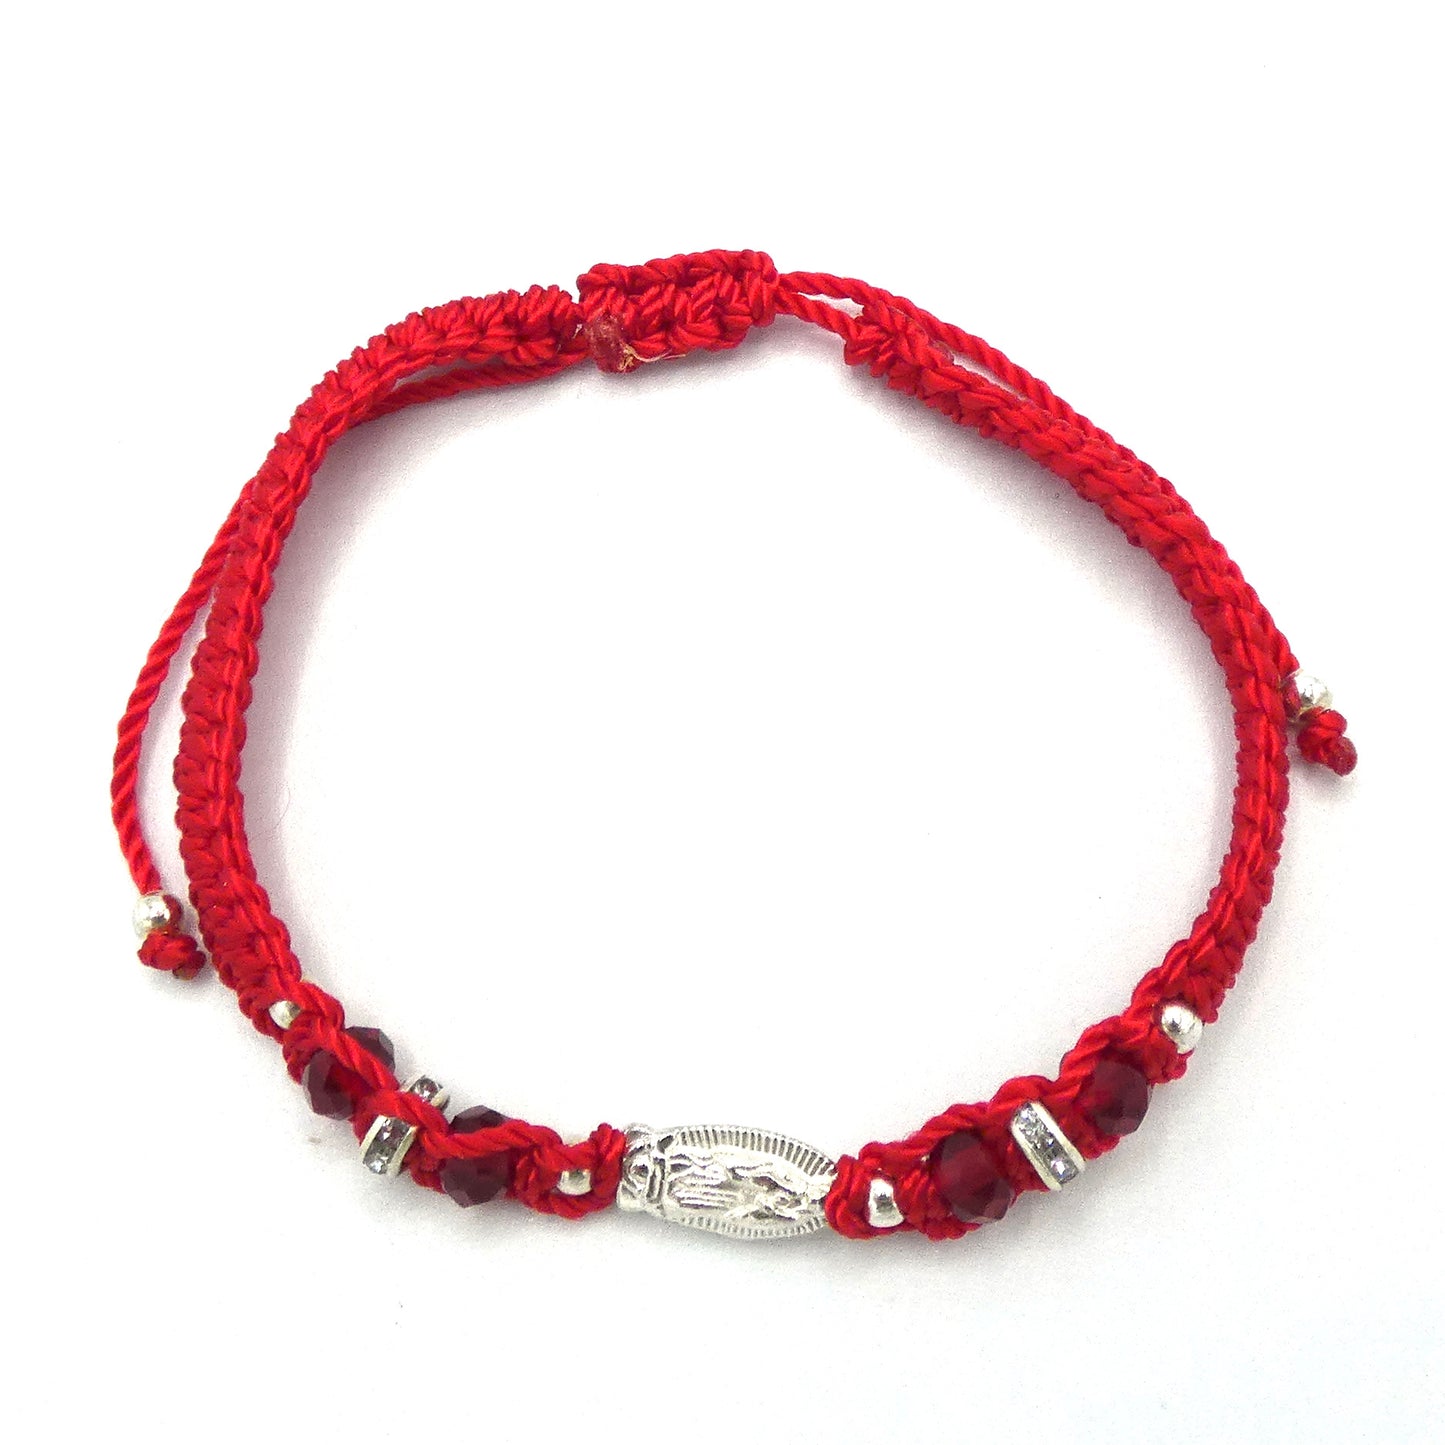 Braided and Beaded Bracelet of Assorted Colors with Guadalupe Medal